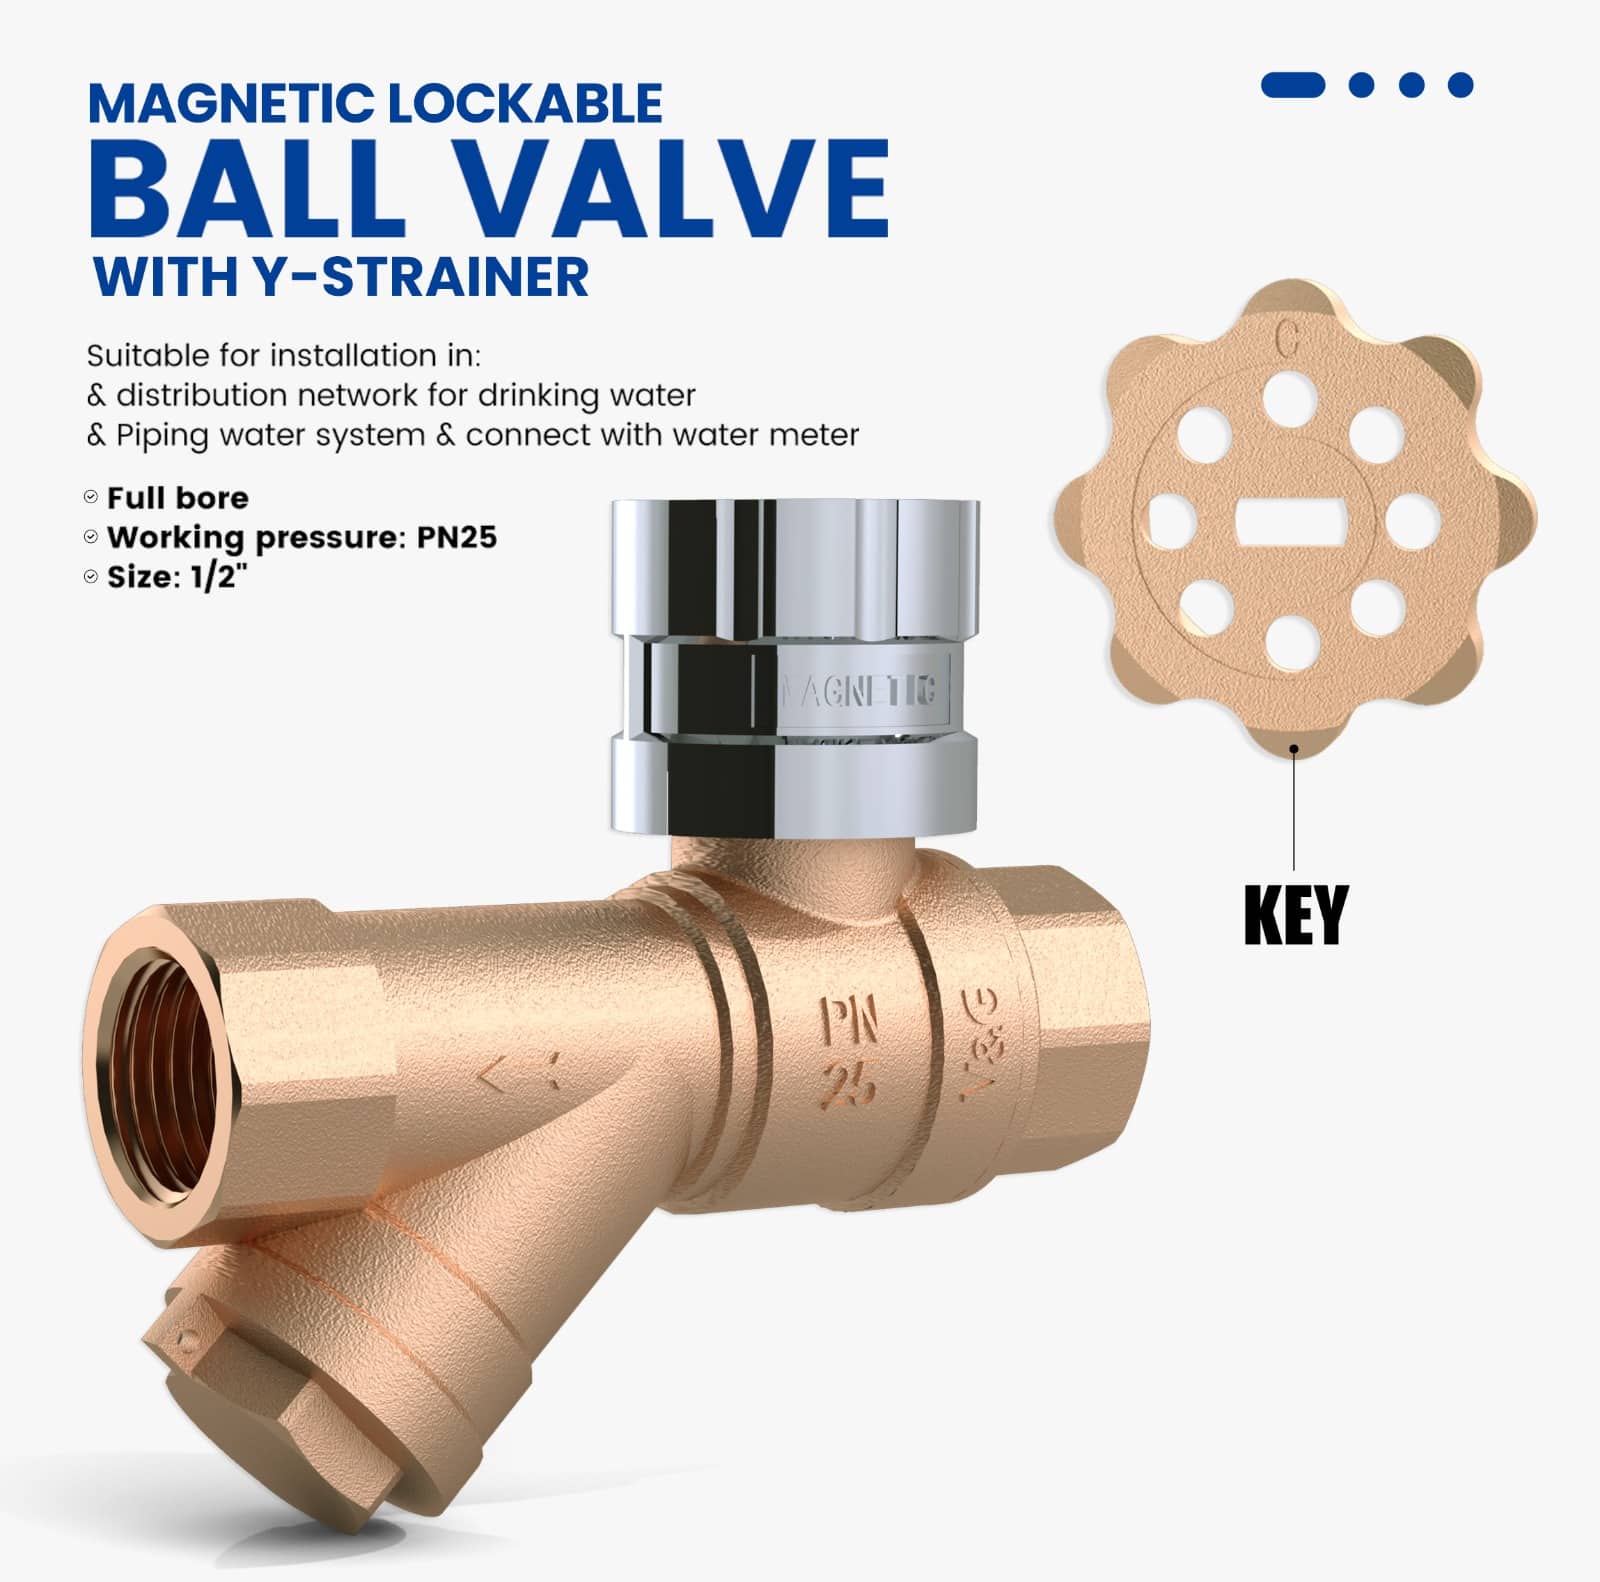 Magnetic ball valve with Y strainer